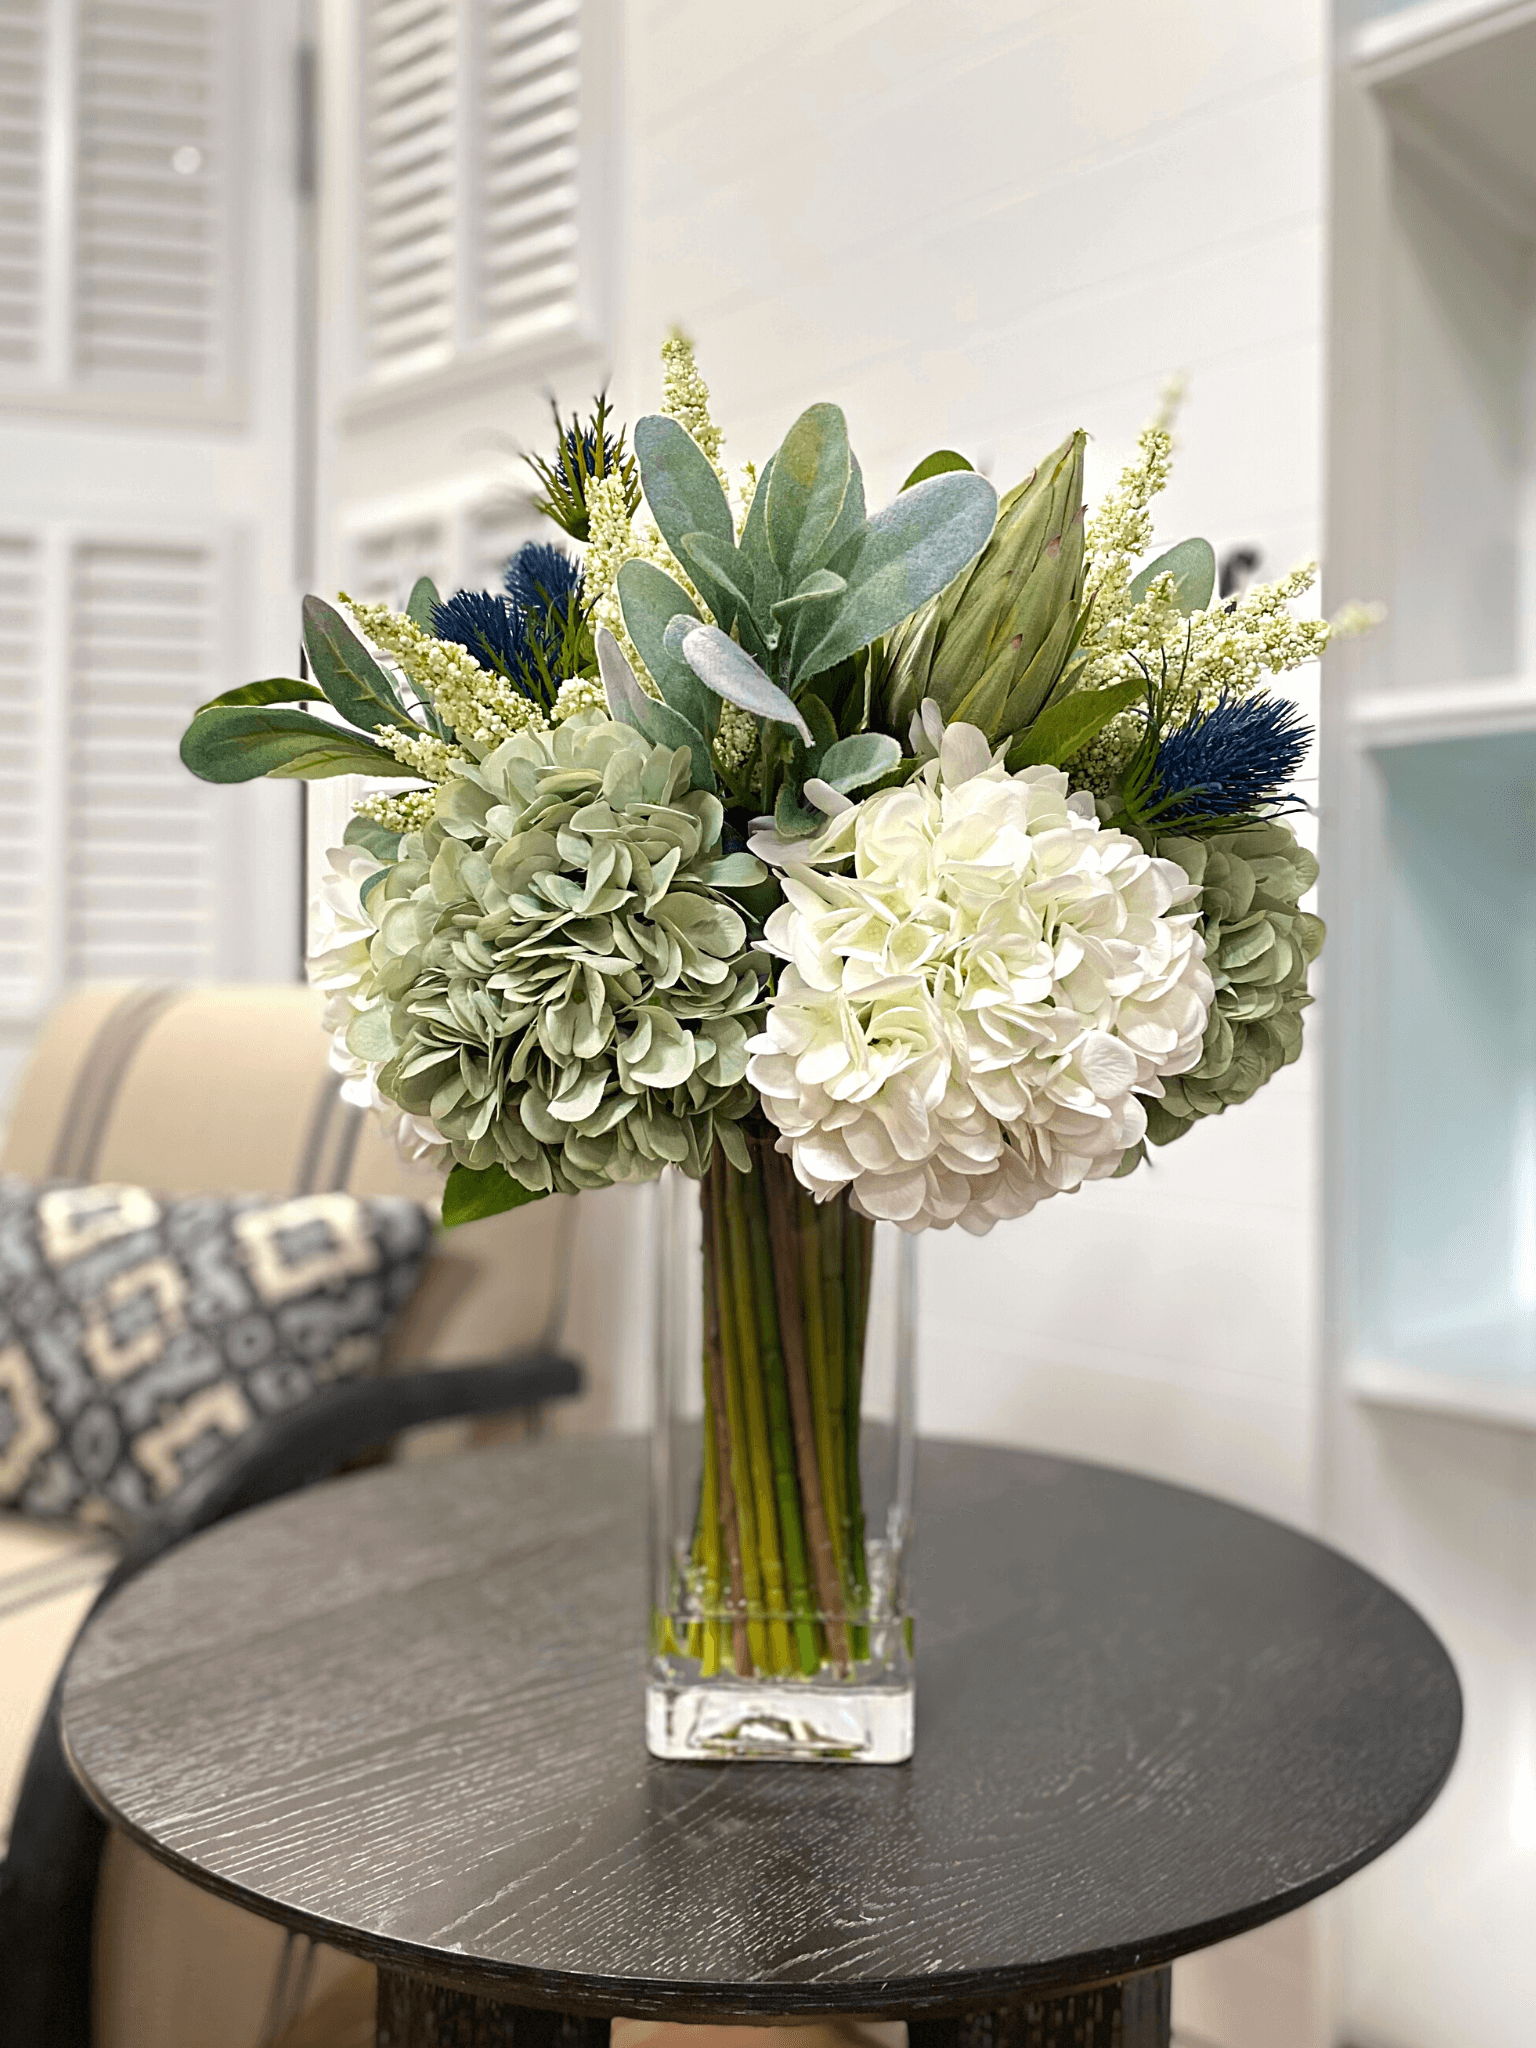 Creative Displays Assorted hydrangea, lamb’s ear and protea arrangement in clear glass